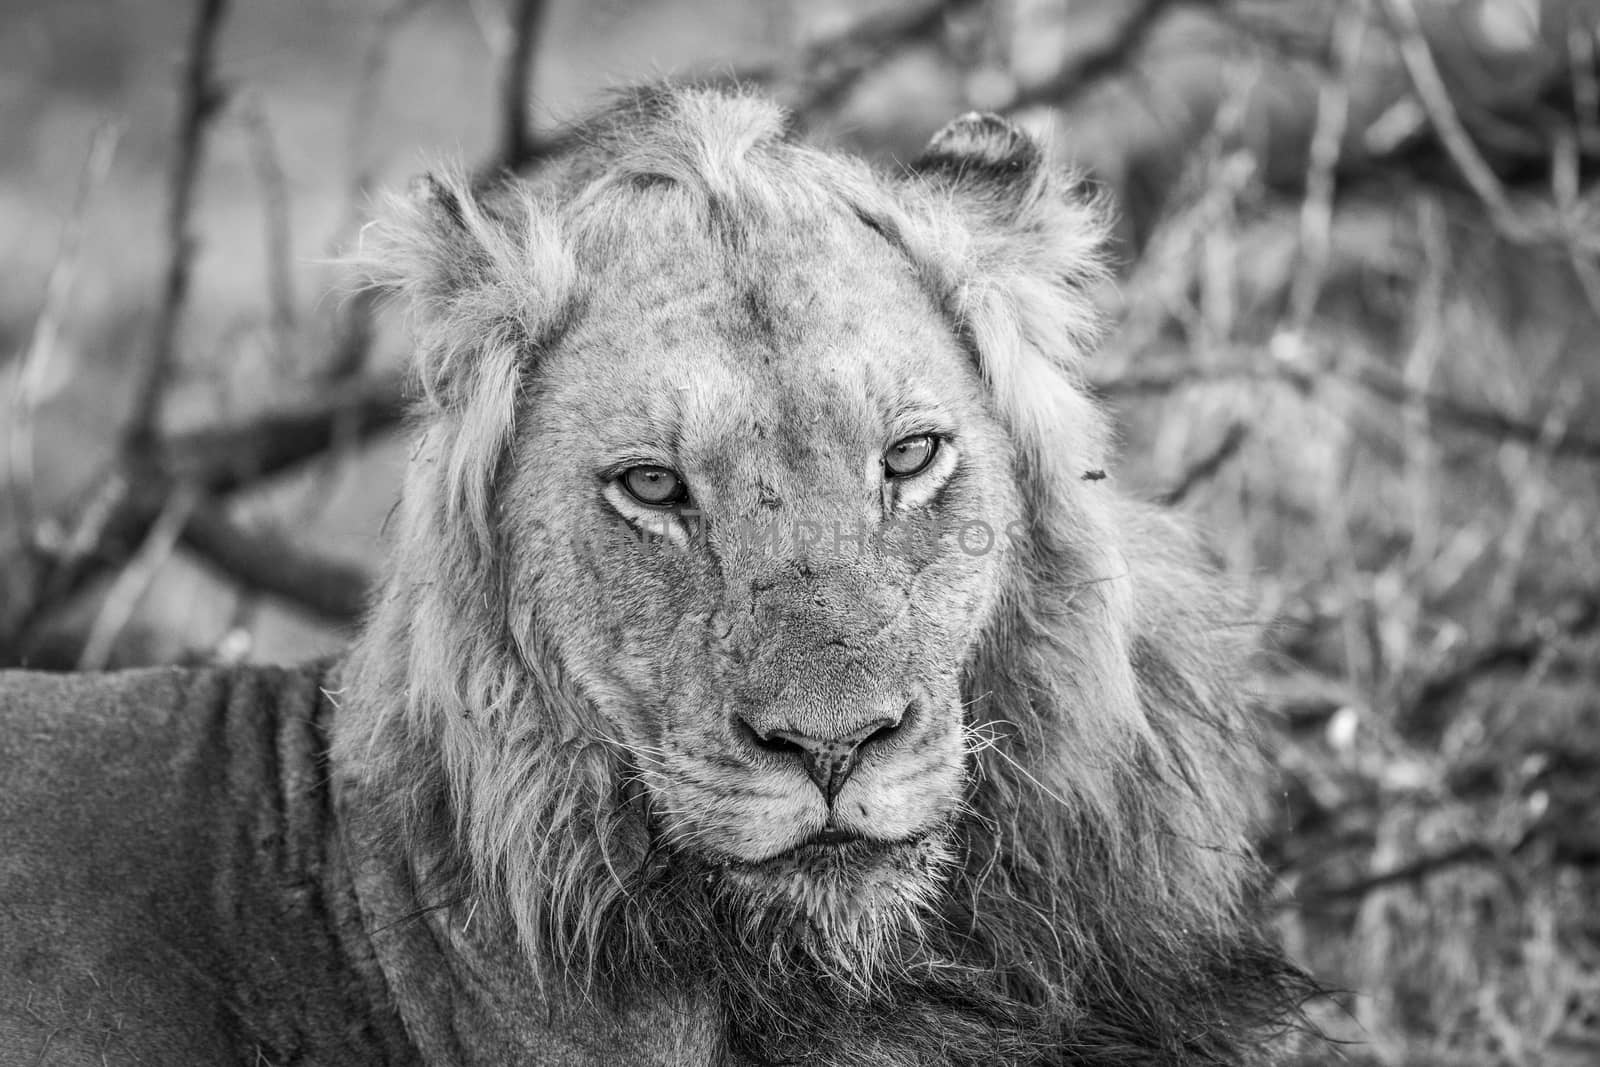 Starring male Lion in black and white in the Kruger National Park, South Africa.